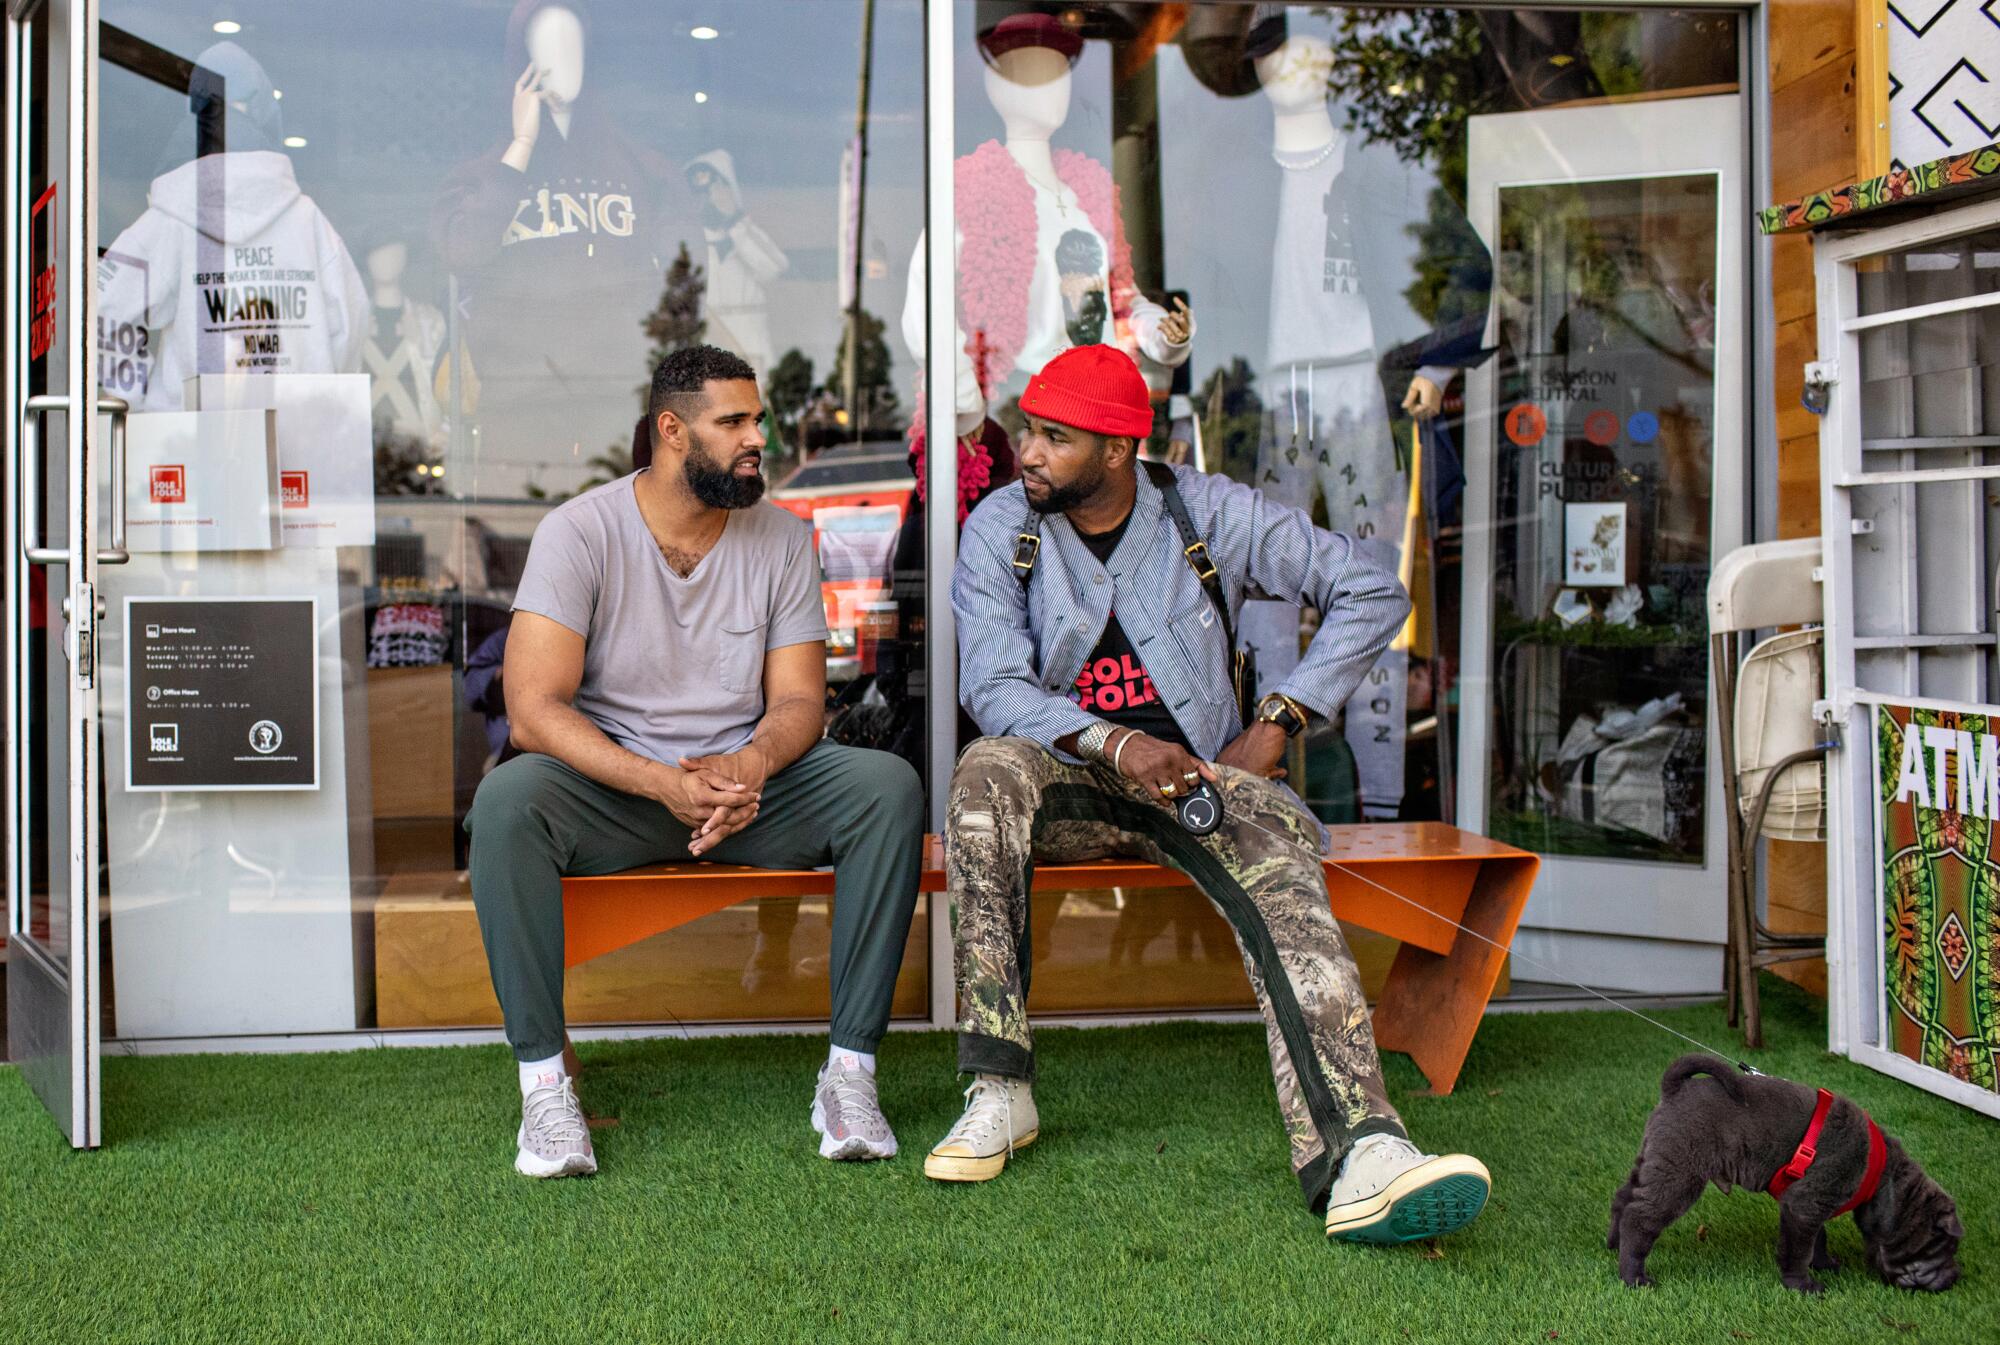 Two men sit and talk on a bench in front of a store